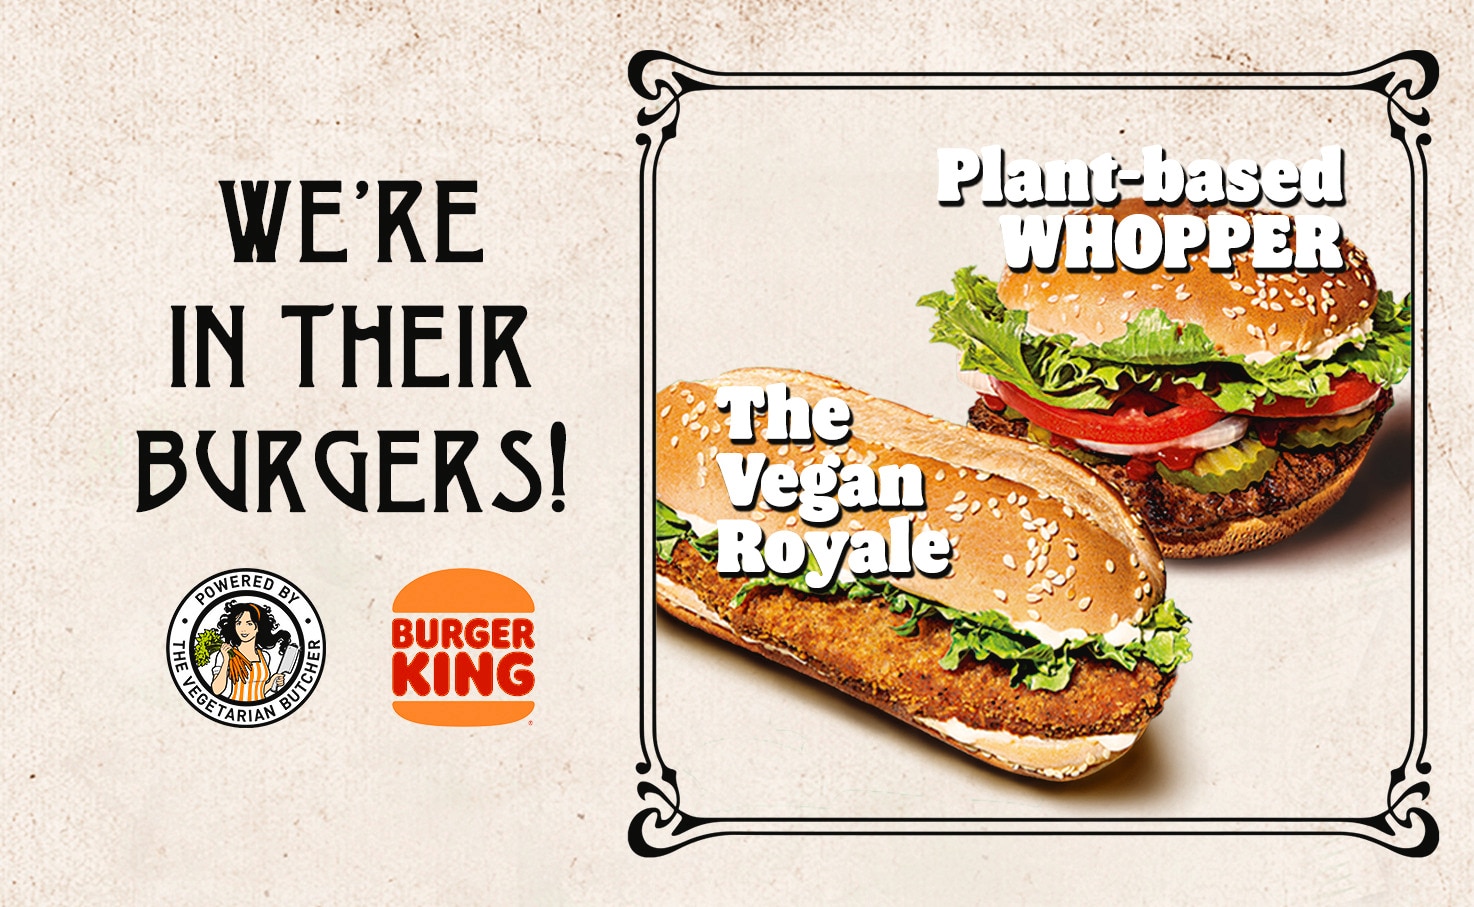 Burger King says it is collaborating with 